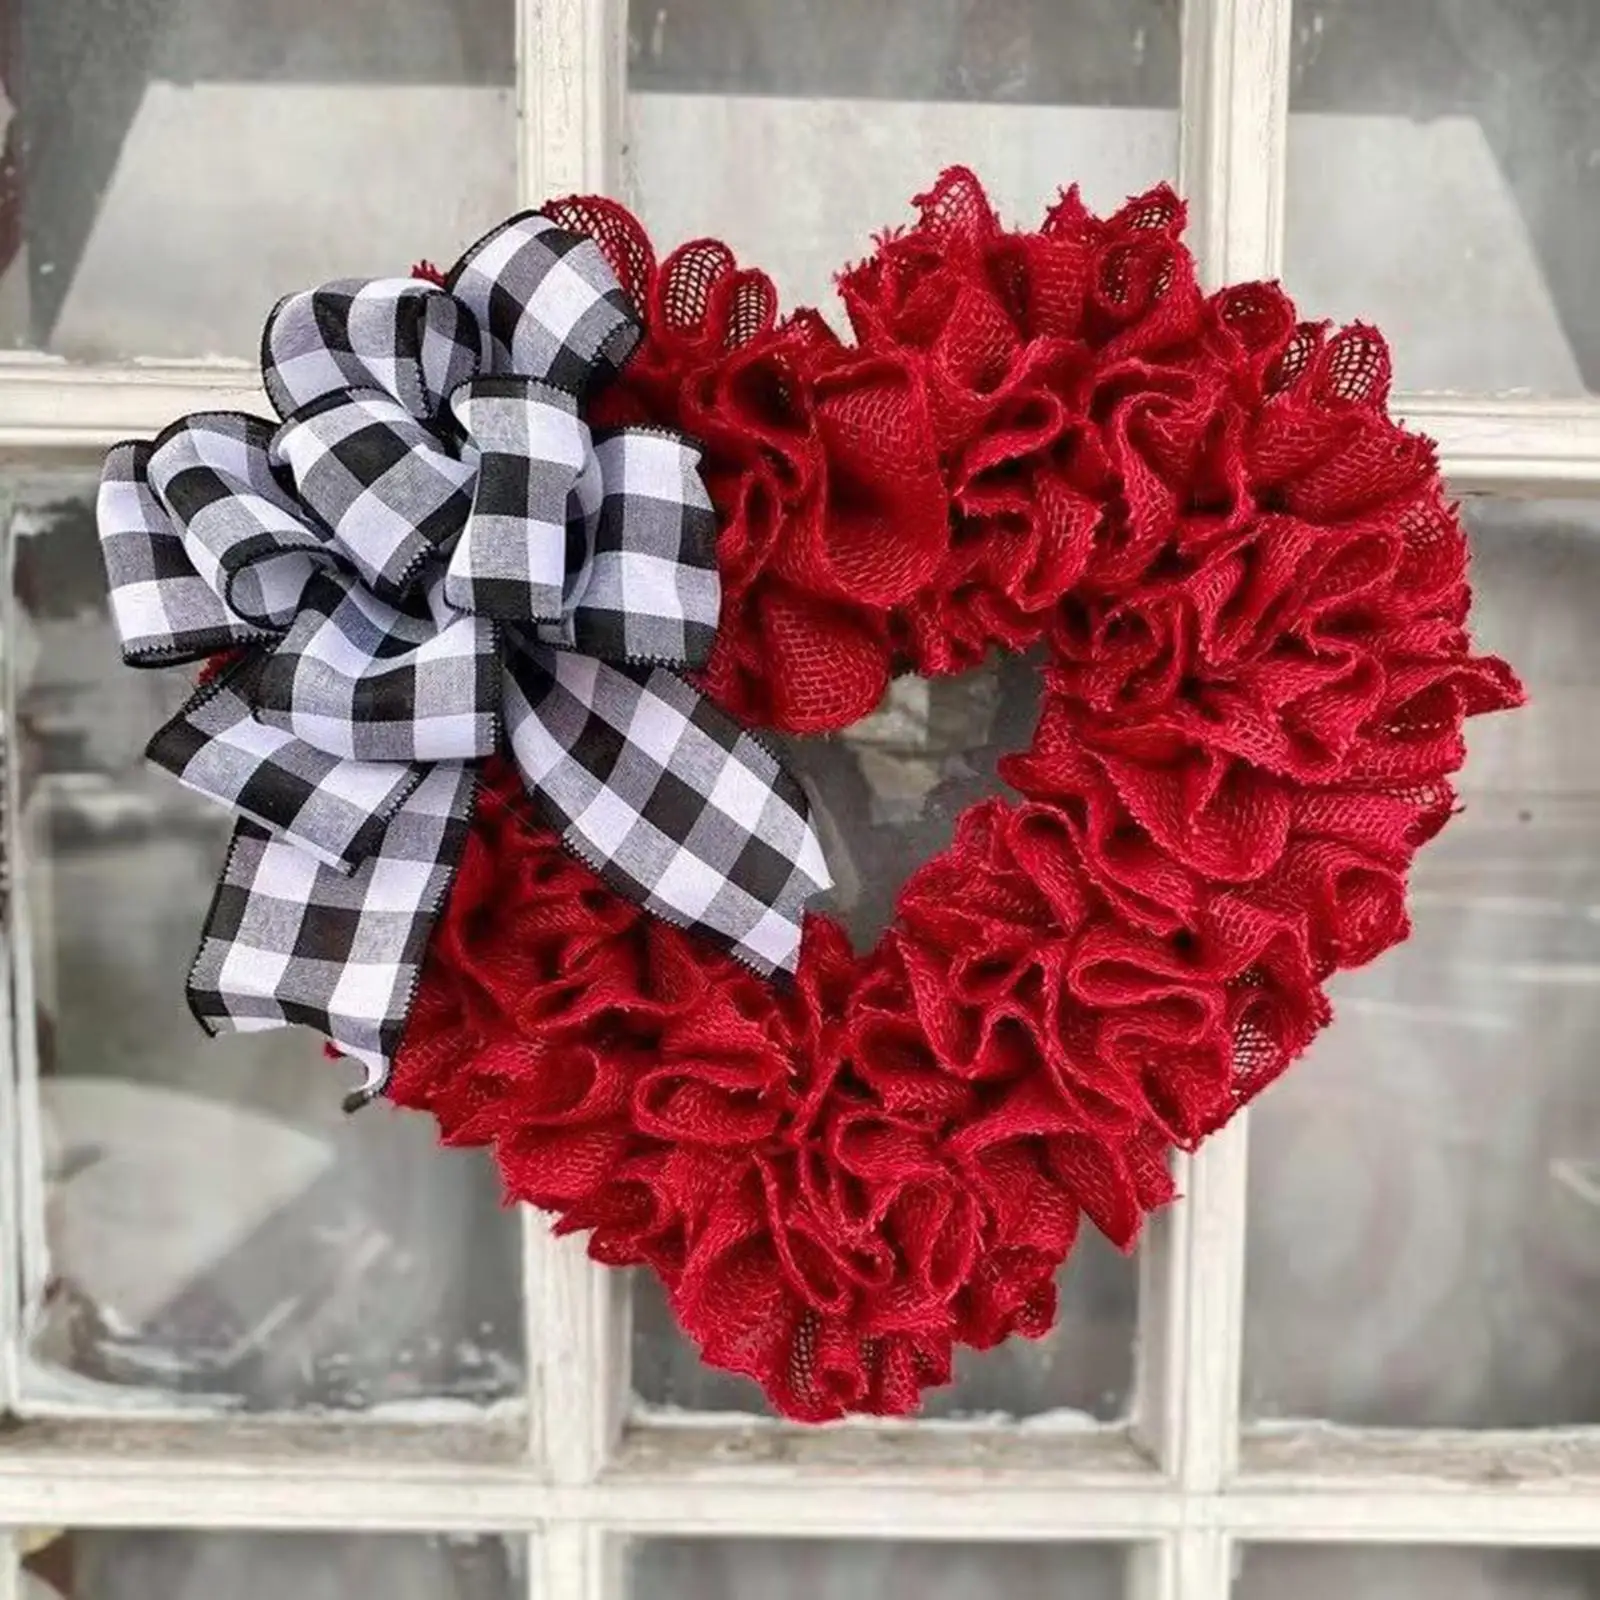 Shaped Wreath  Day 40cm Decorative Plaid Bowknot Artificial Garland for Party Anniversary  Ornament